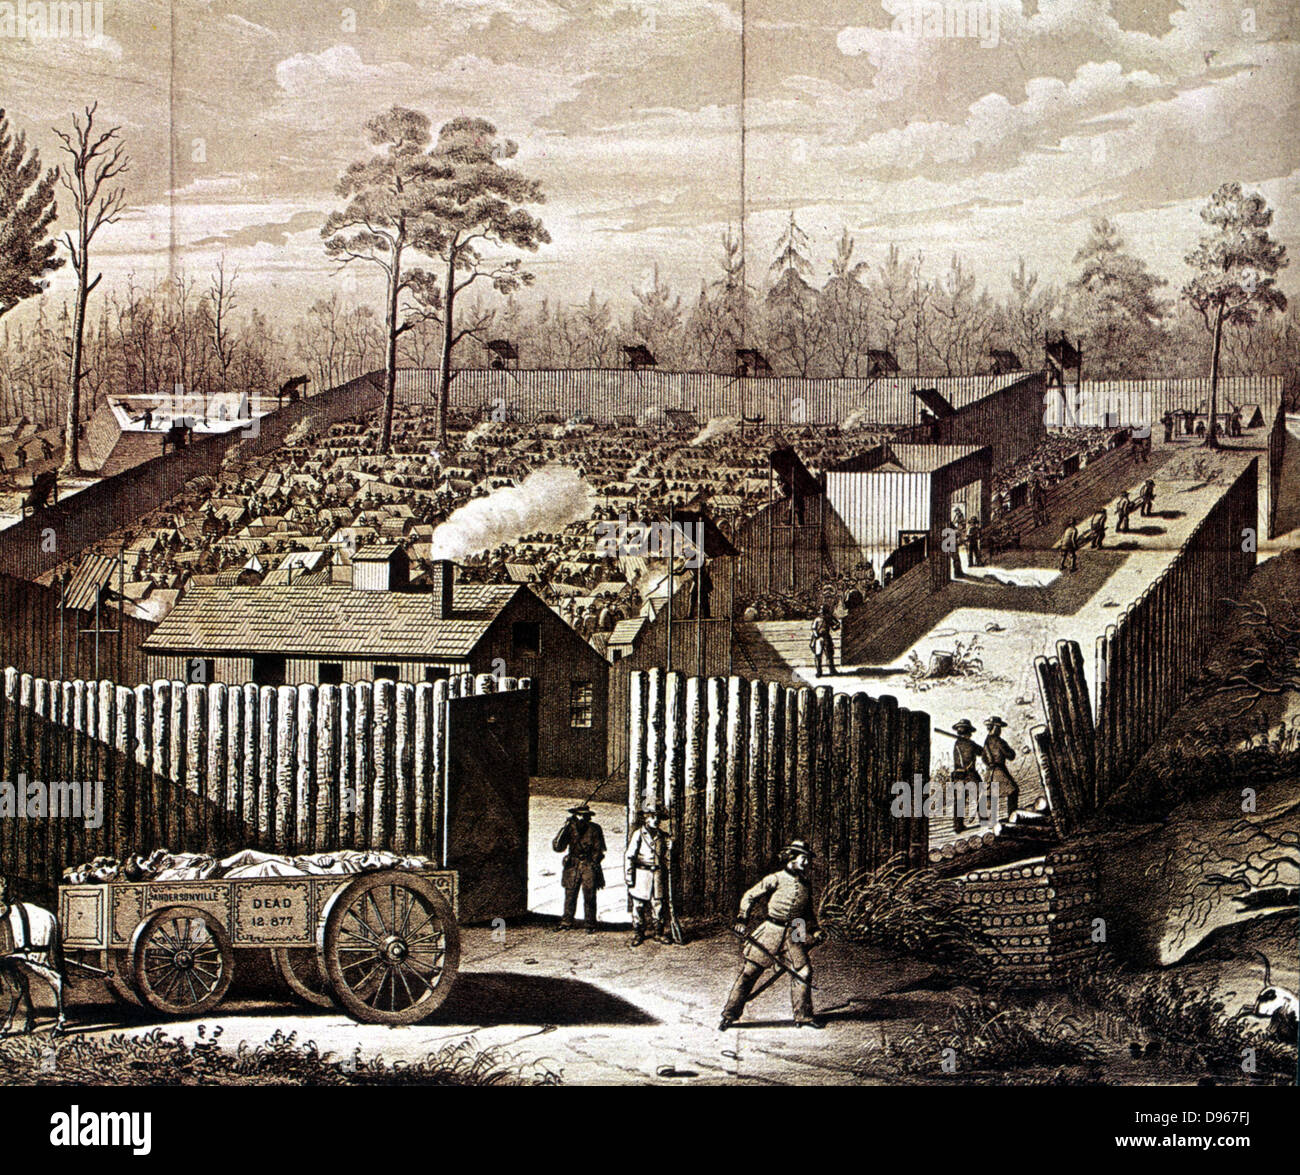 American Civil War: Prison stockade at Andersonville, Georgia. During summer of 1864 32,899 Union (northern) prisoners were confined here. In the National Cemetery at Andersonville 12,912 who did not survive are buried. In left foreground the dead cart is taking away bodies. Stock Photo